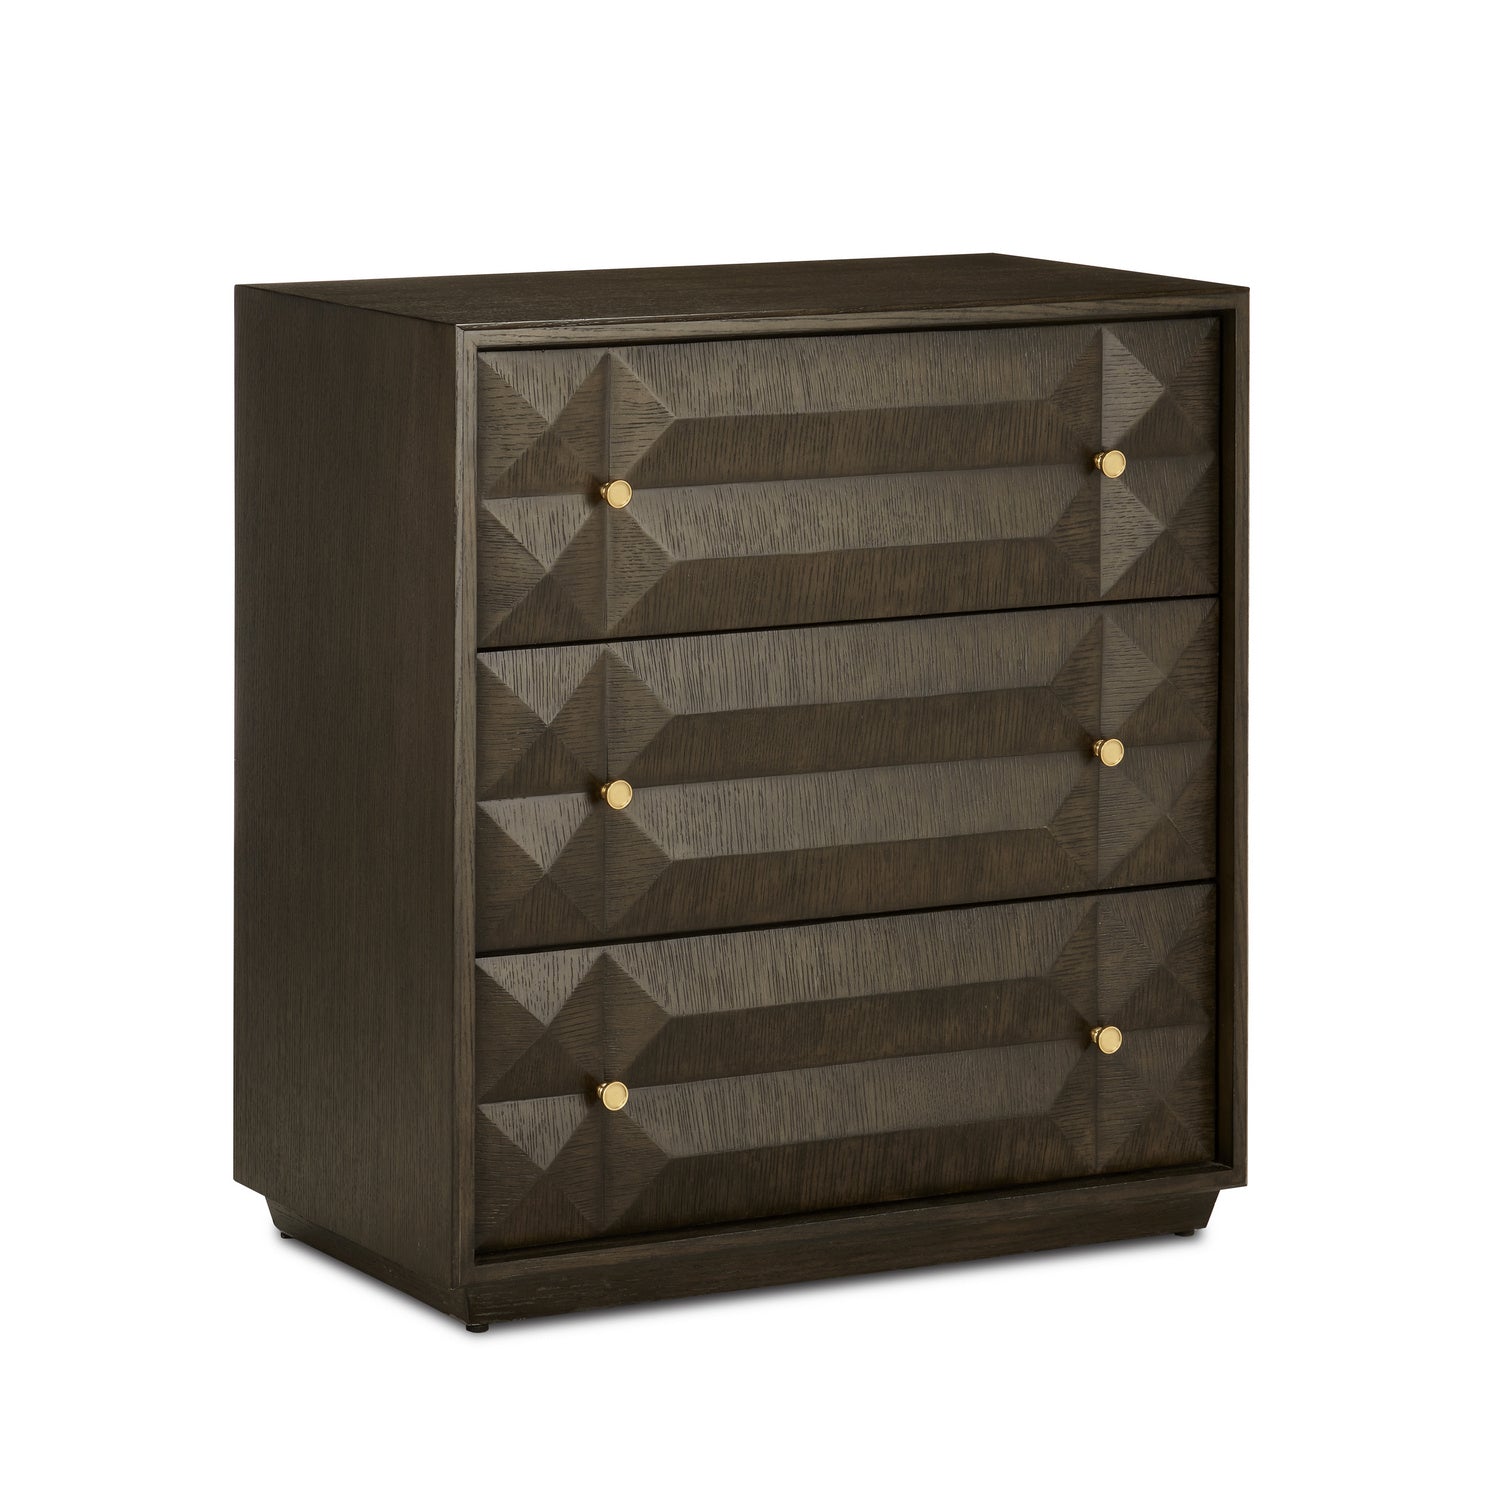 Chest from the Kendall collection in Dove Gray/Polished Brass finish